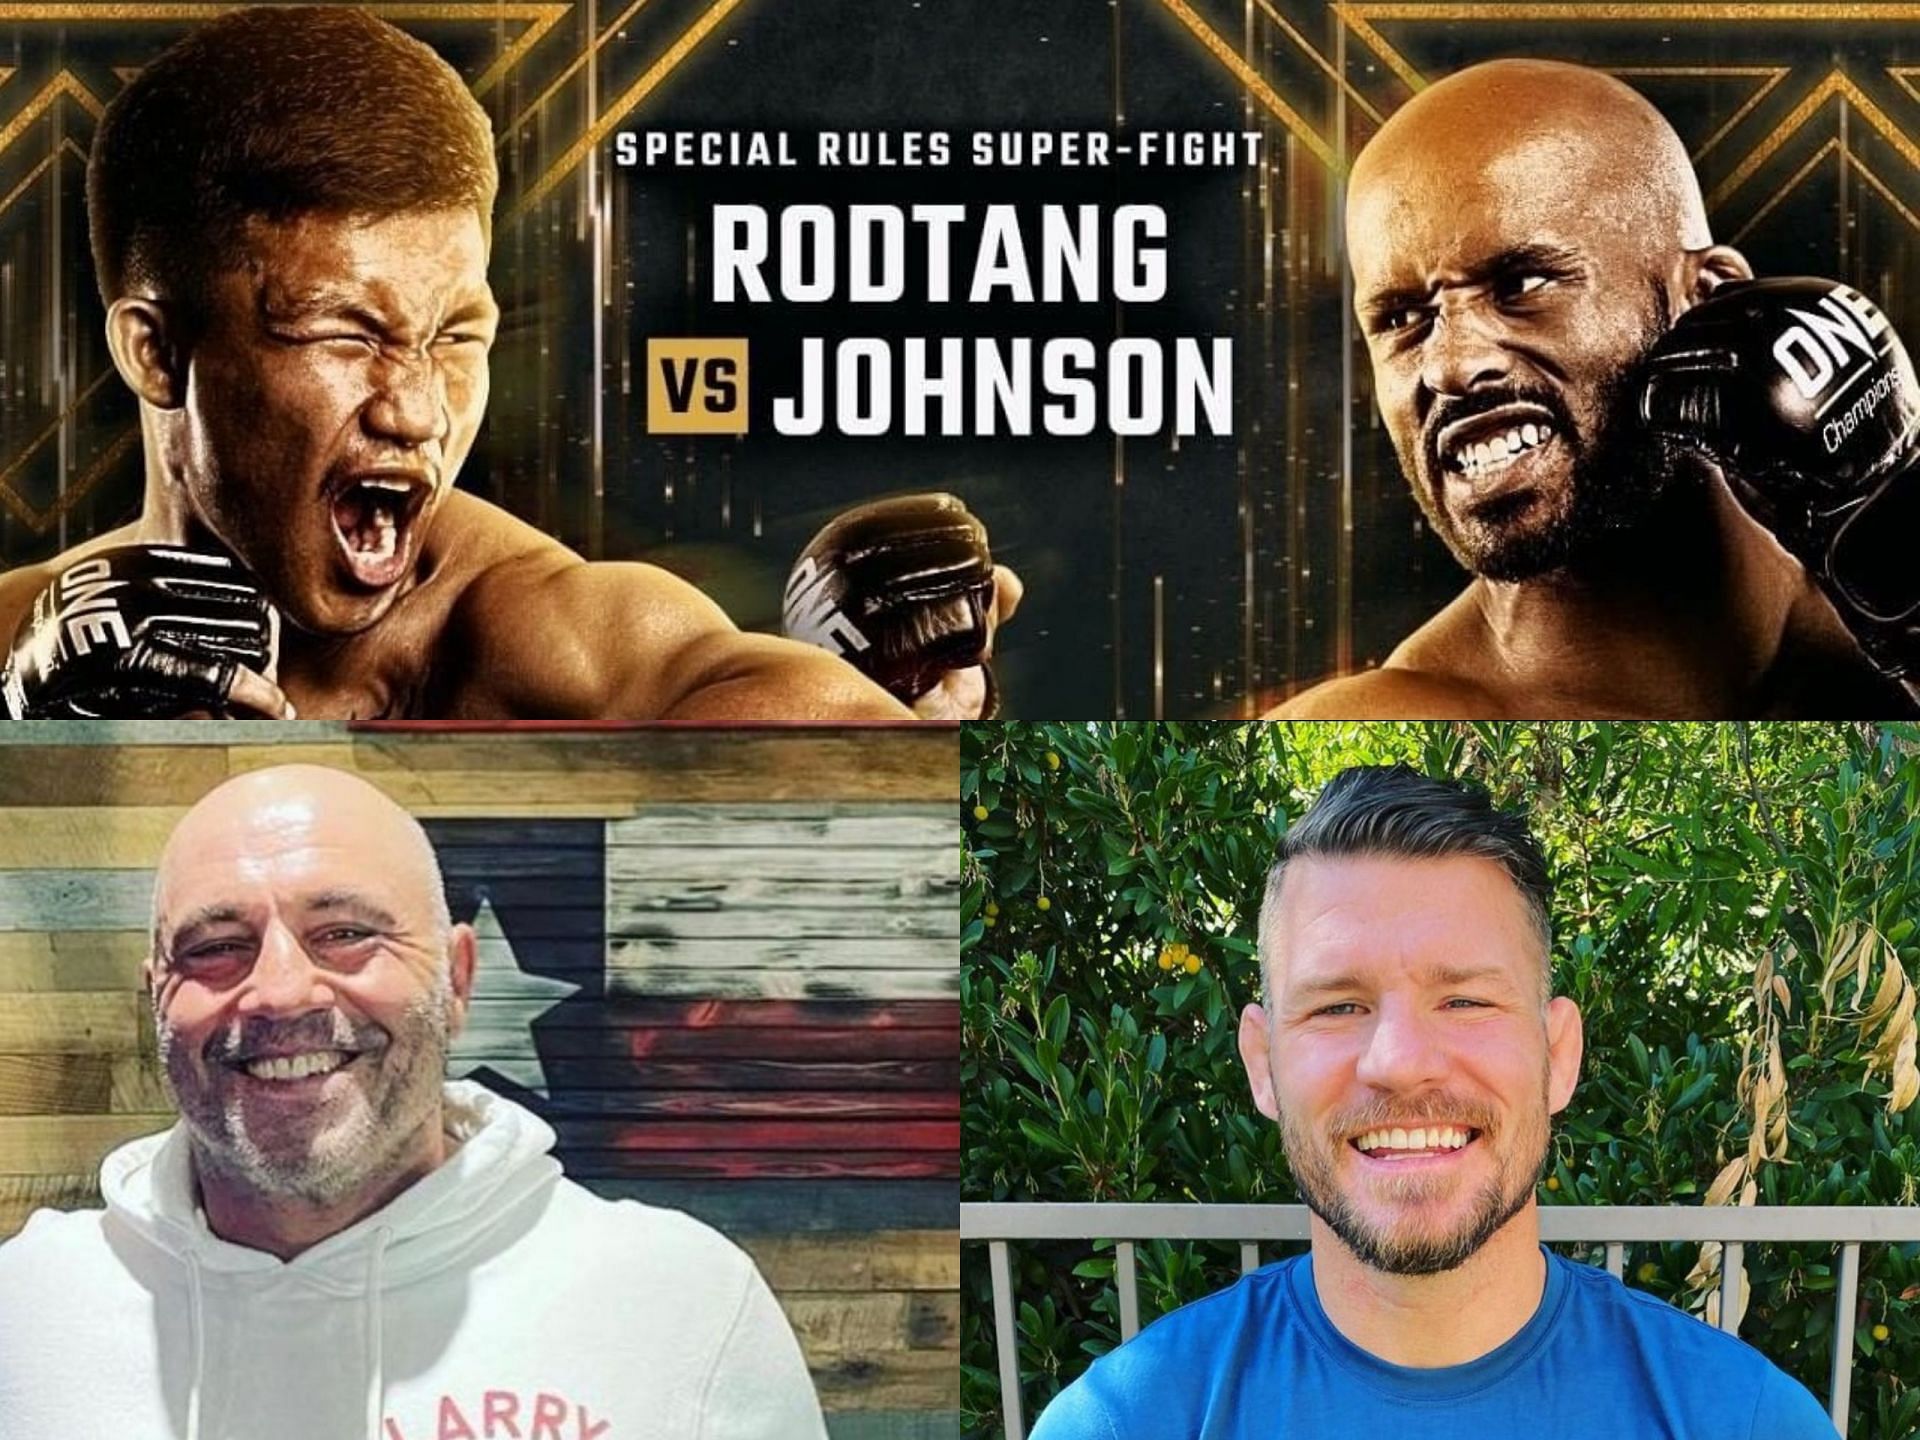 Joe Rogan (left) and Michael Bisping (right) shared their thoughts on the special rules battle (above) at ONE X. [Photo: Instagram @joerogan @mikebisping]